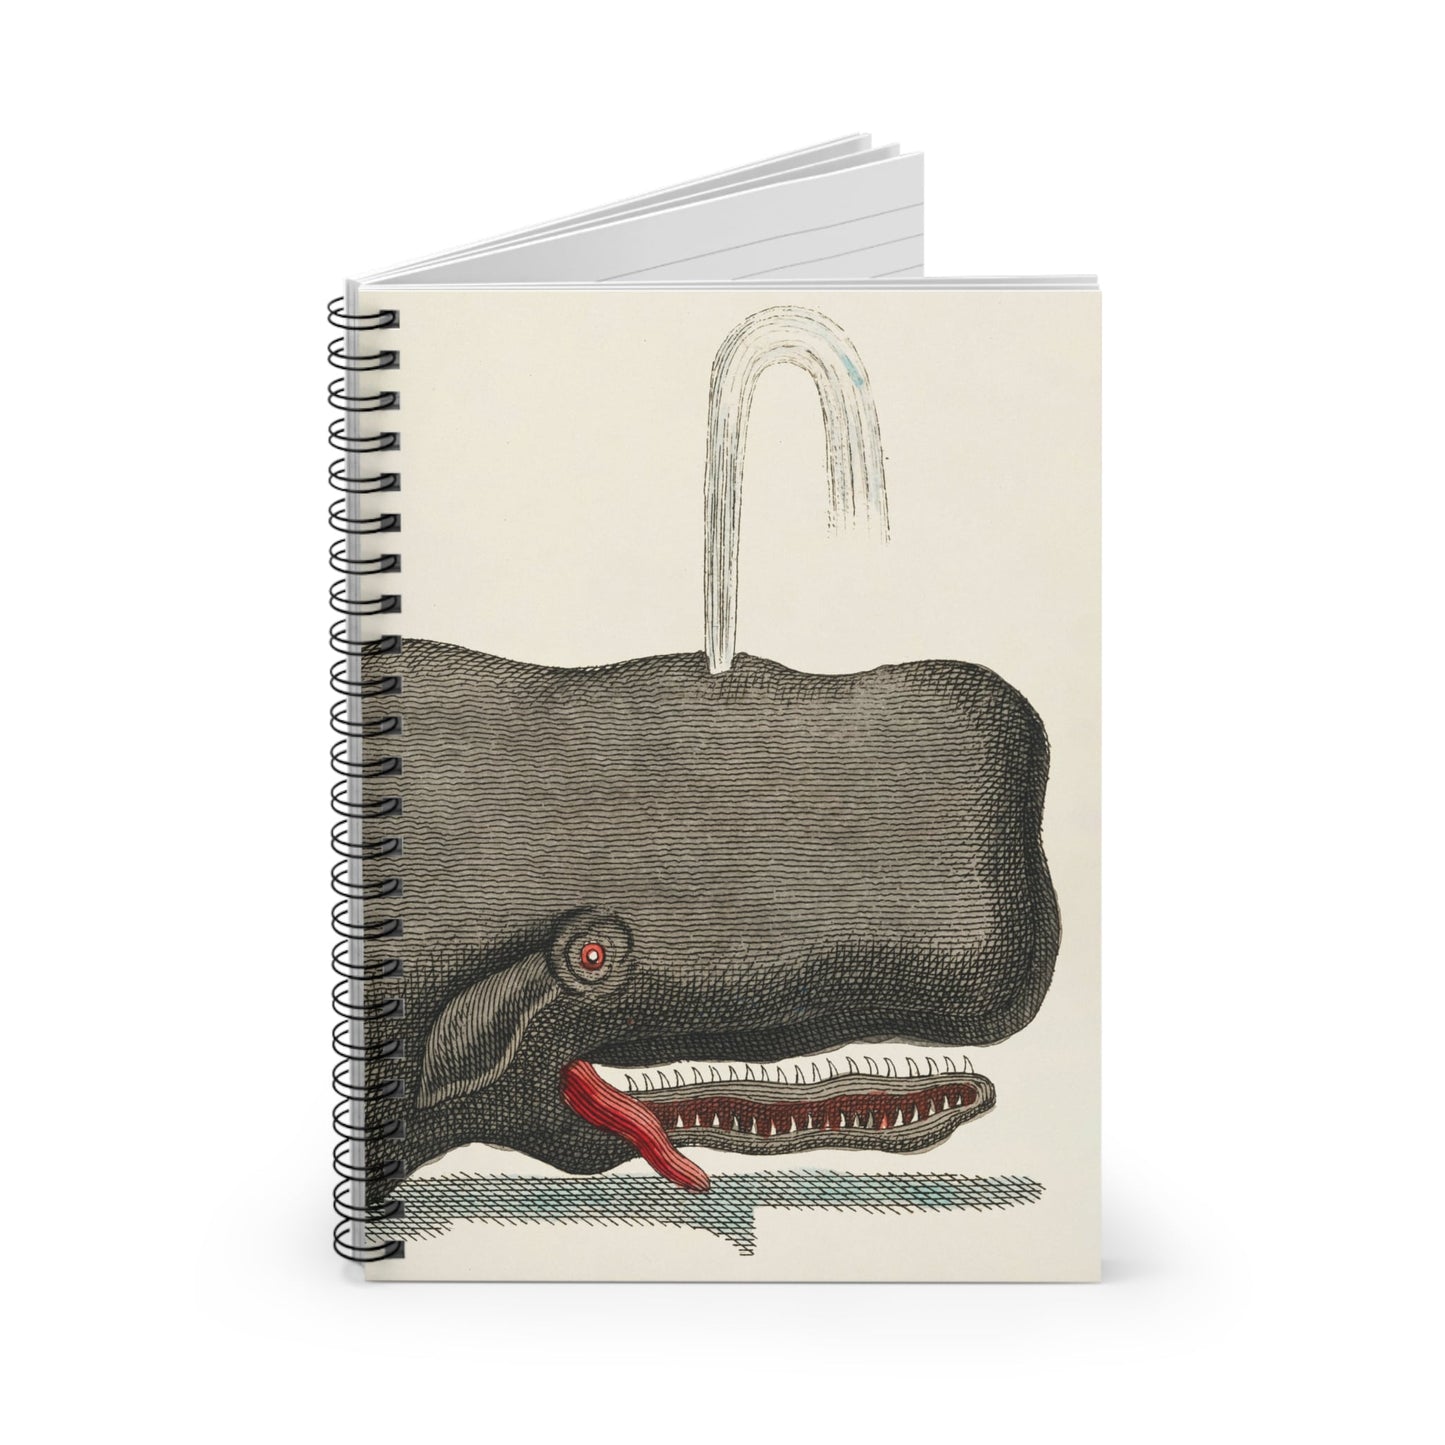 Funny Whale Spiral Notebook Standing up on White Desk